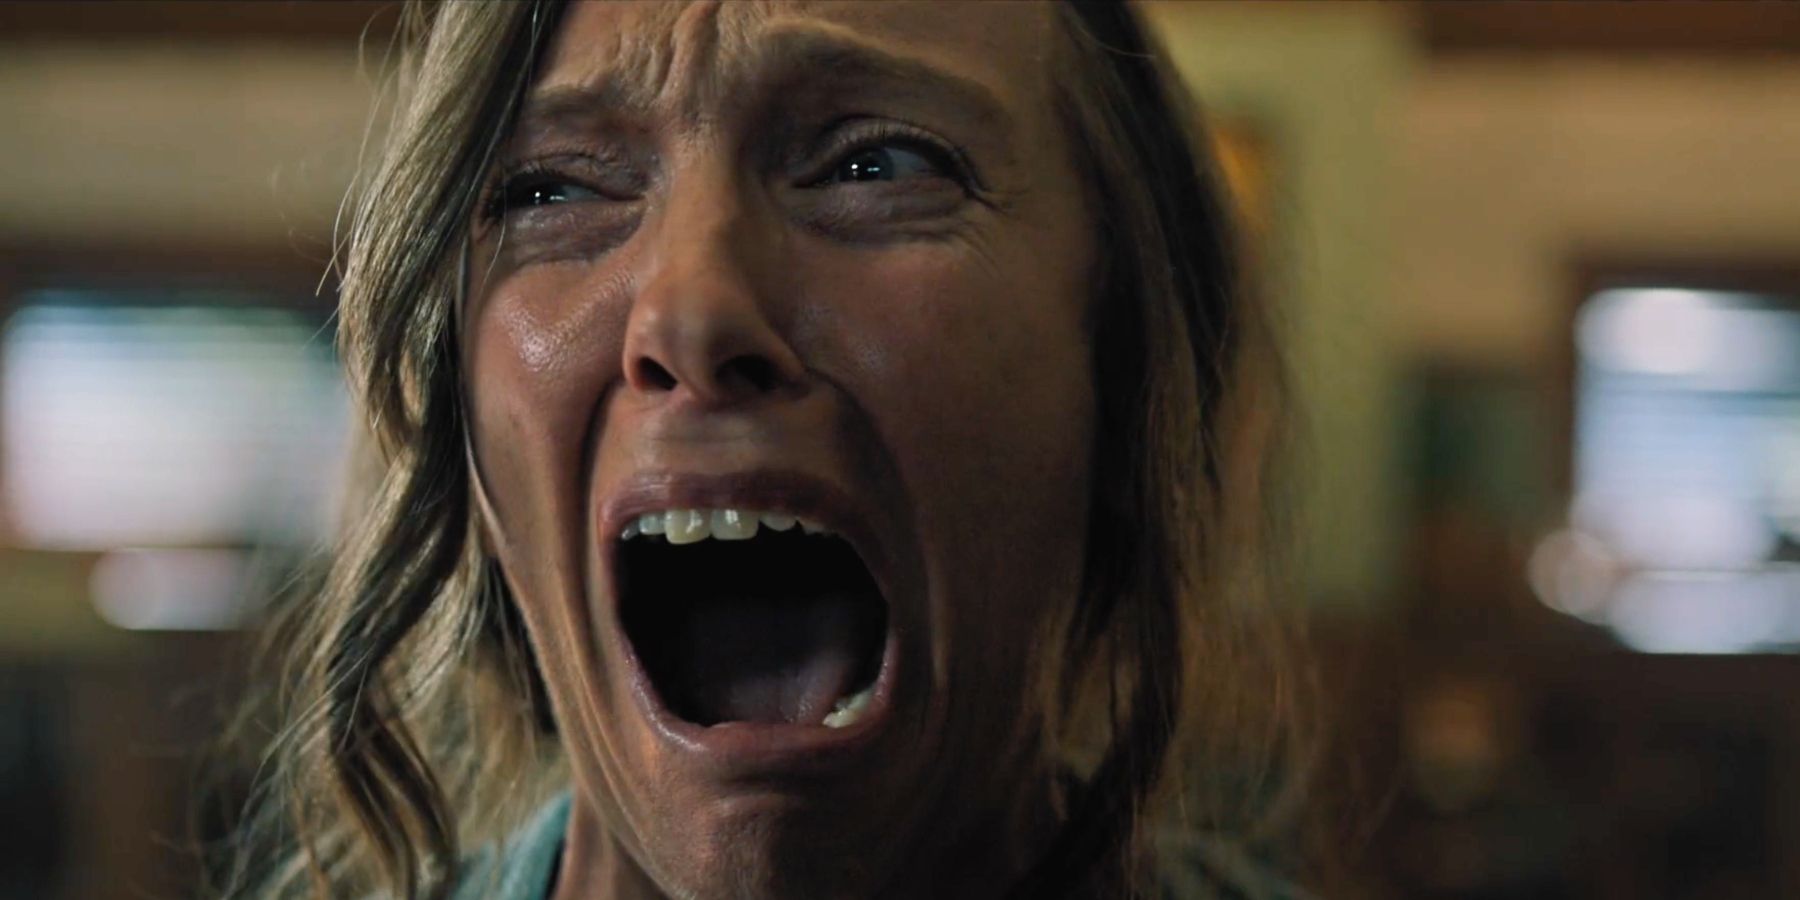 Toni Collette as Anine screaming in Hereditary